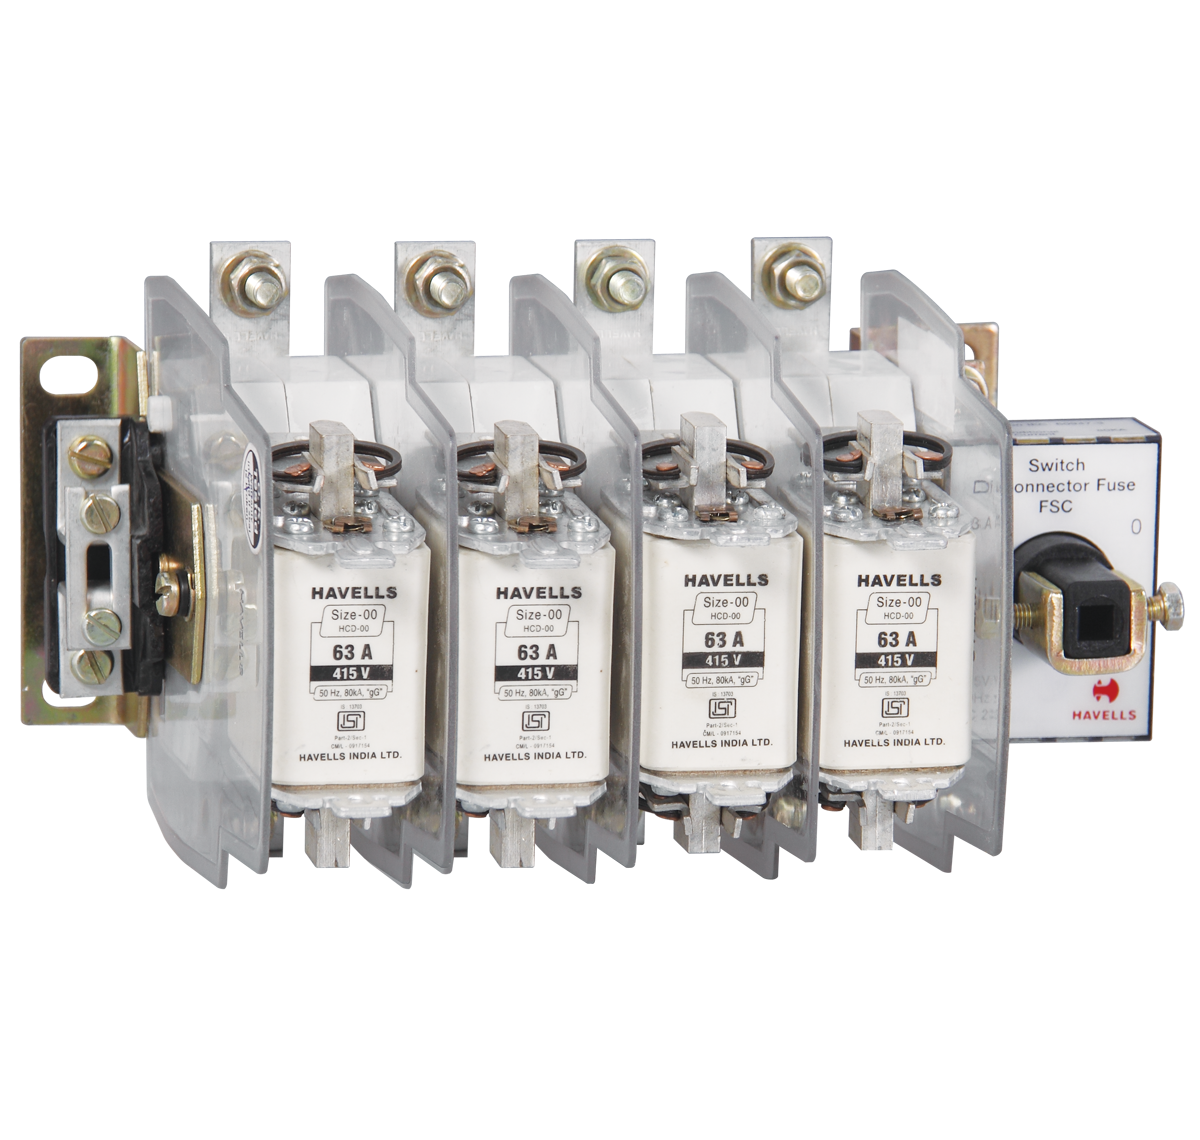 Kompact EZO Switch Disconnector Fuse Unit Four Pole with Sheet Steel Enclosure with 4 Fuse